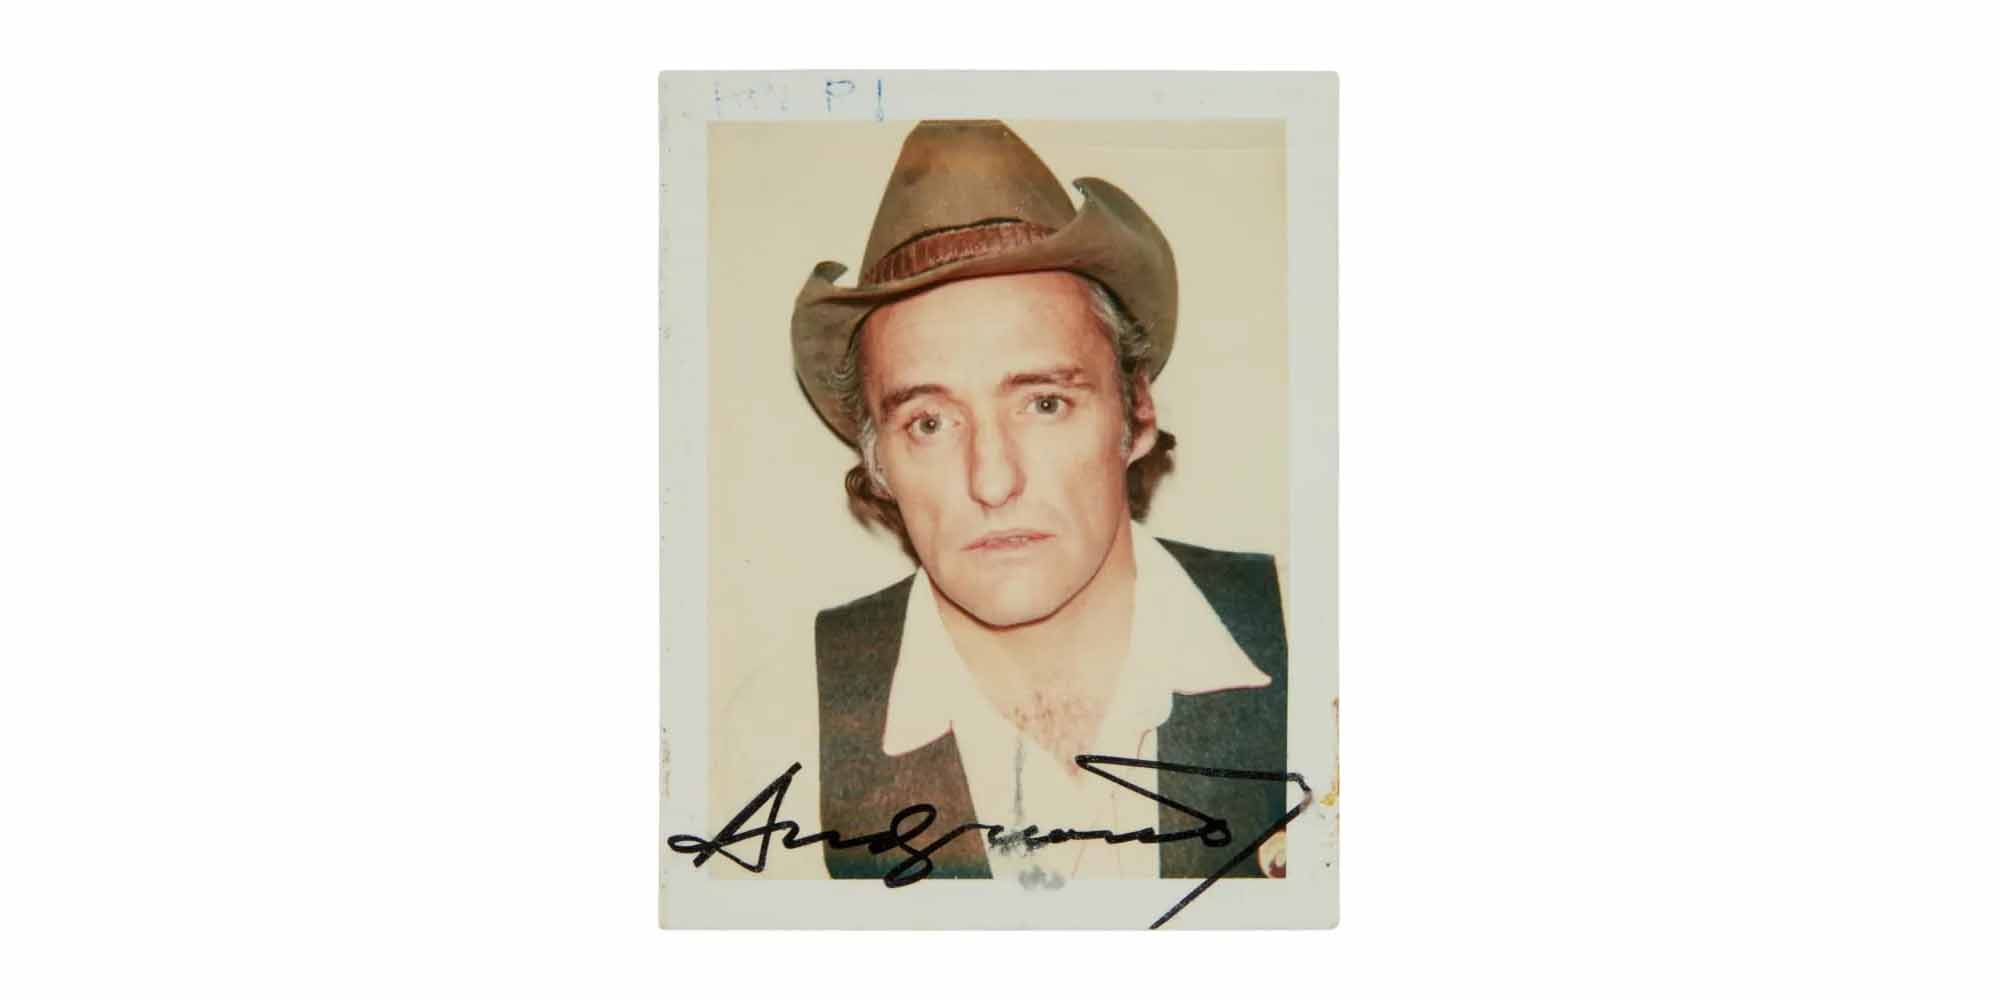 Dennis Hopper, Andy Warhol-taken and -signed Polaroid photos, estimated at $20,000-$30,000, at Julien's Auctions.